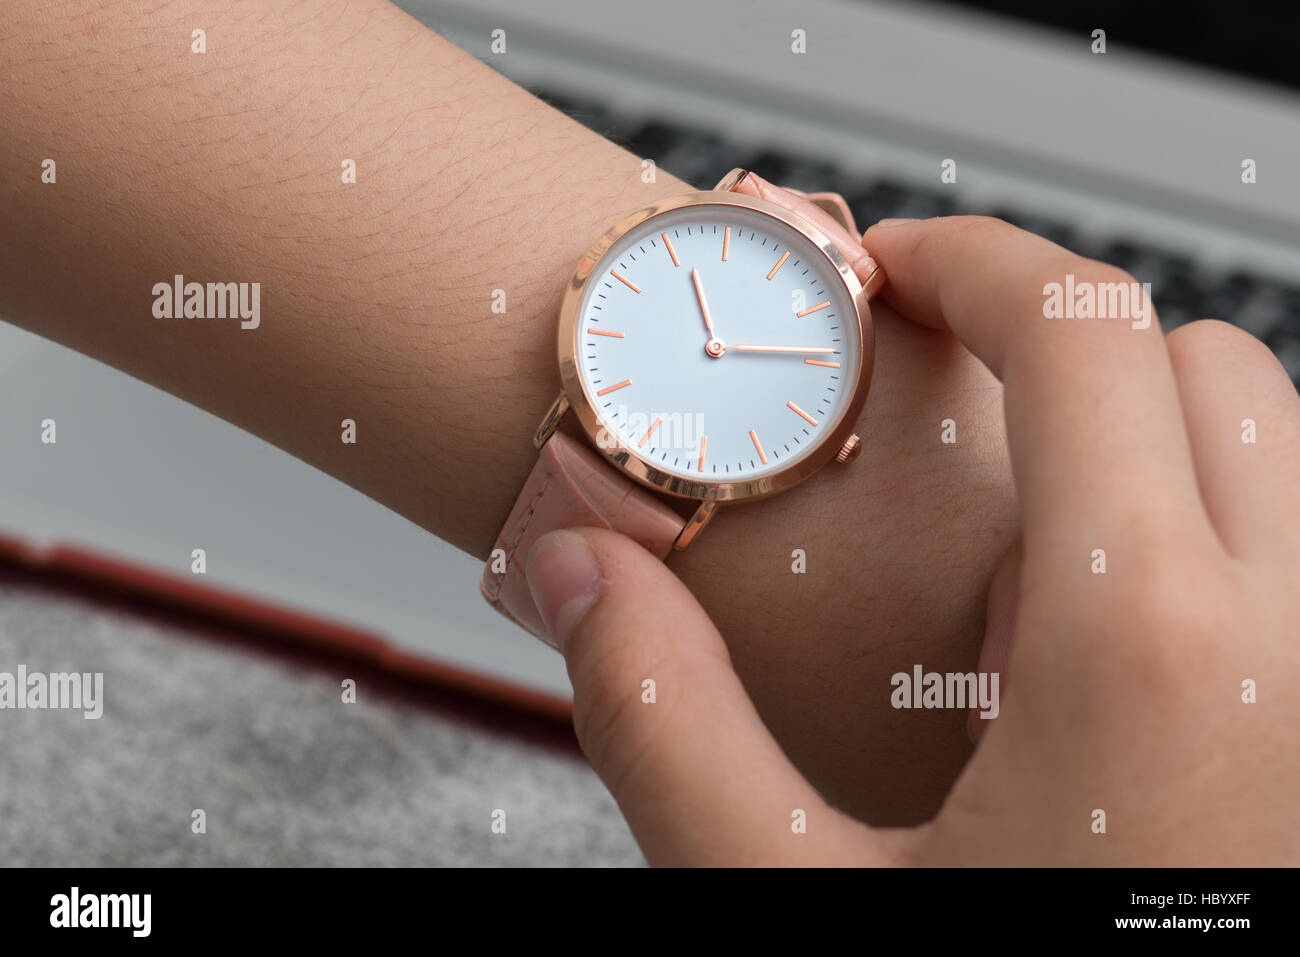 Girl's hand with wrist watch in front of desk with notebook computer Stock Photo